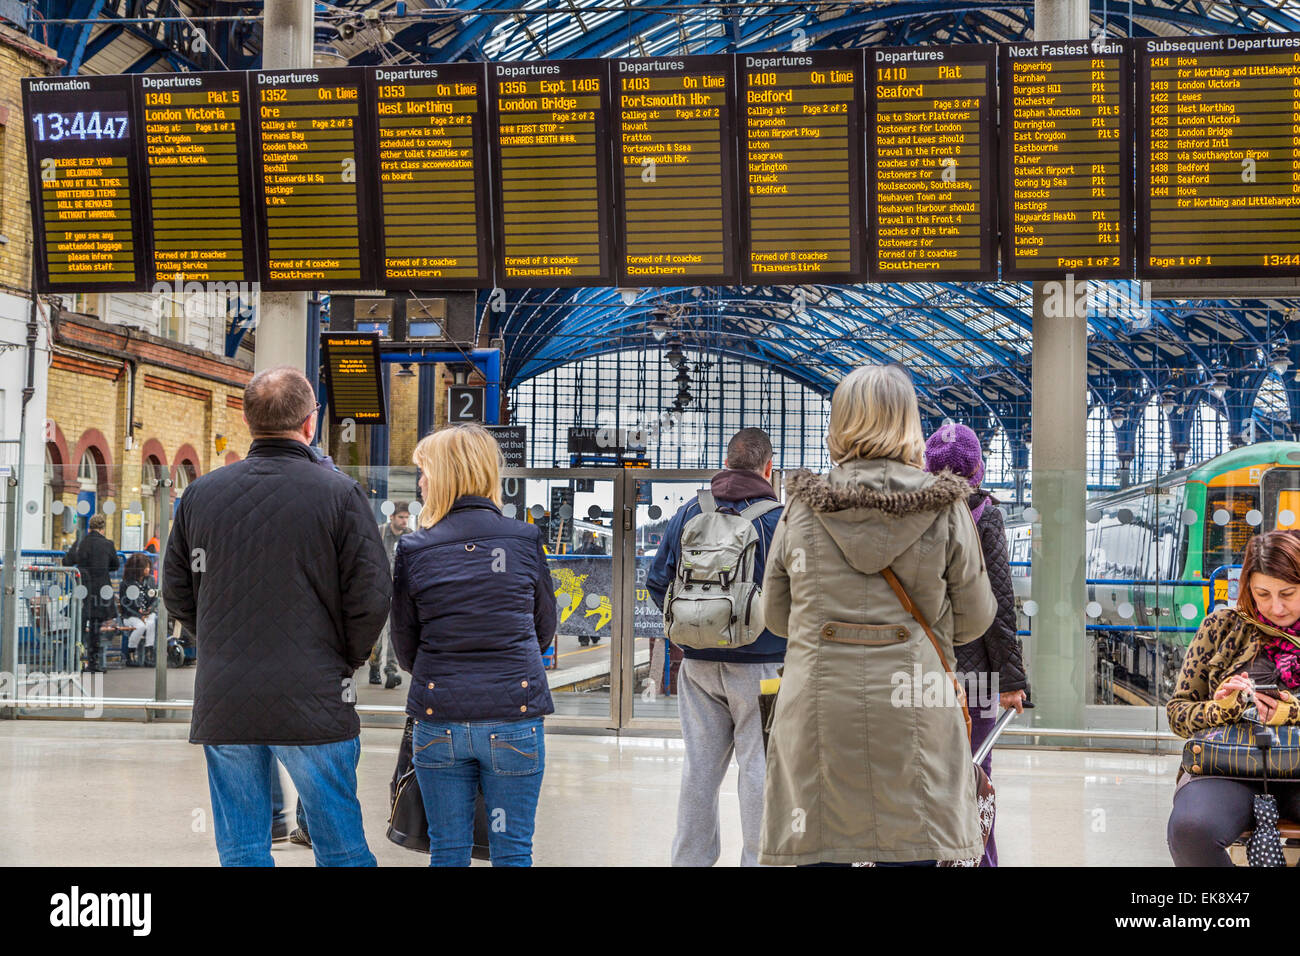 A Landscape image of passengers looking at the Brighton station train departure time board, Brighton,West Sussex England UK Stock Photo